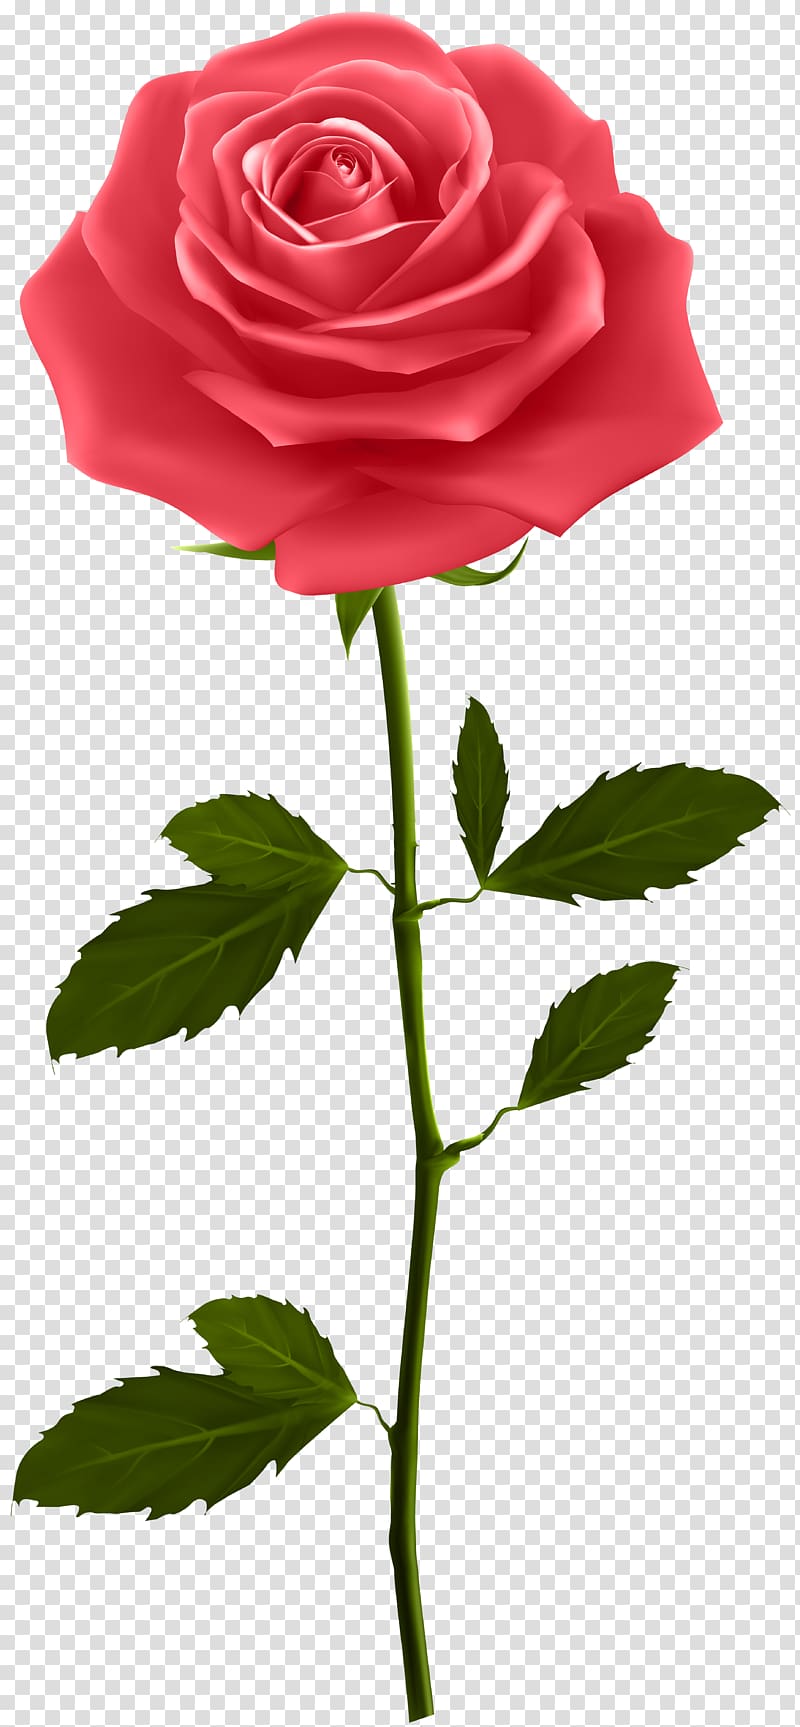 red rose, Rose , Red Rose with Stem transparent background PNG clipart